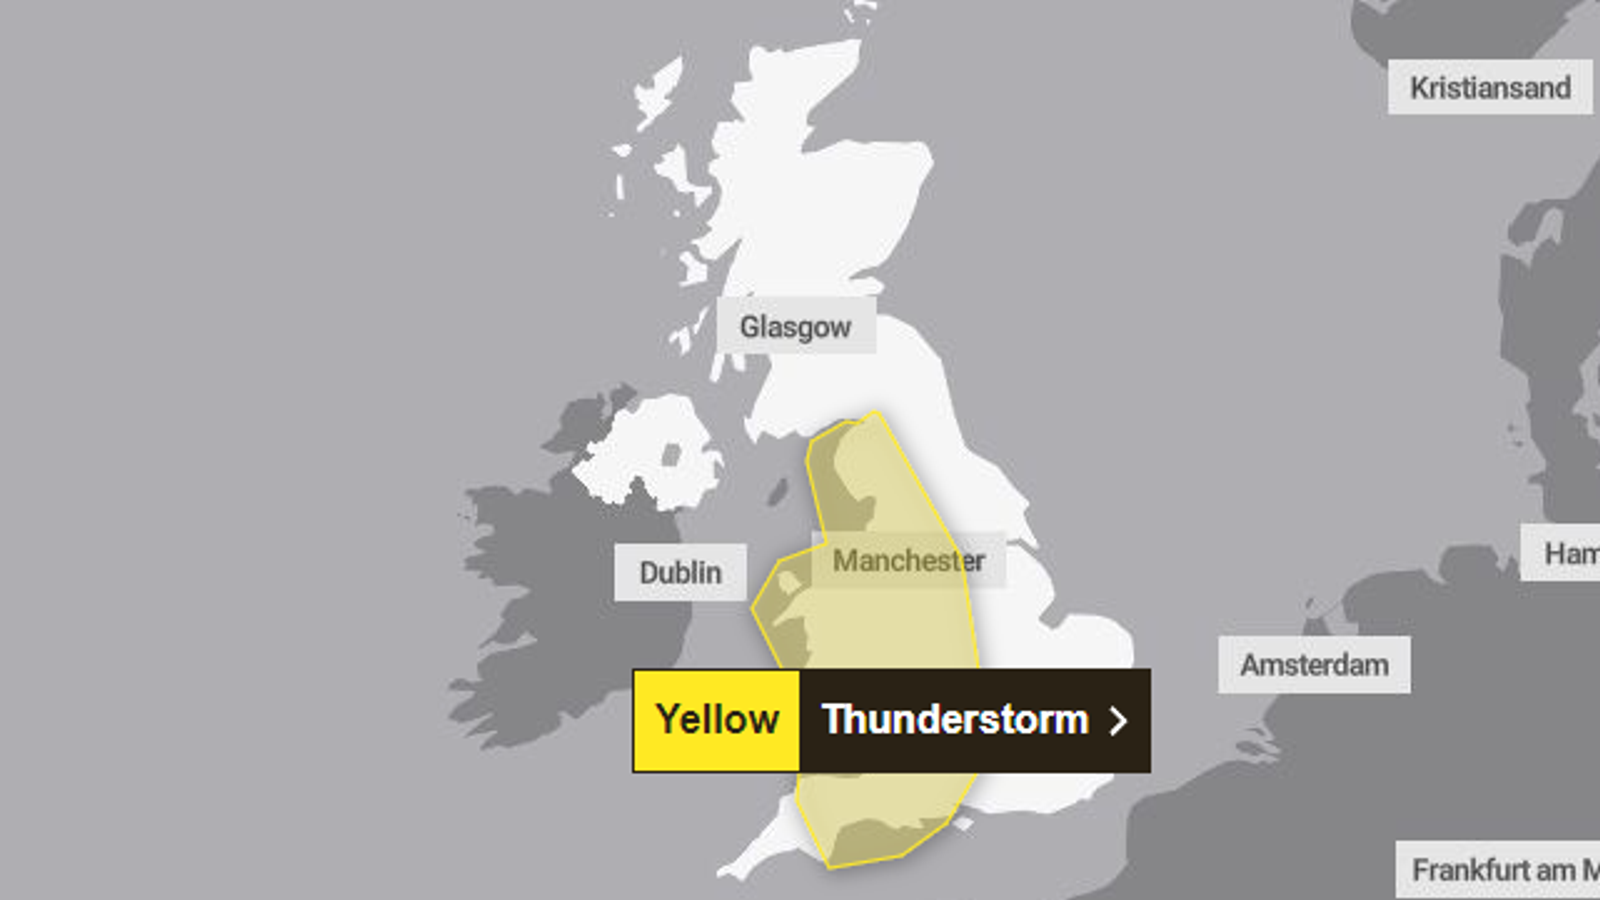 UK weather: Thunderstorm warning for large parts of country after temperatures set to reach as high as 27C